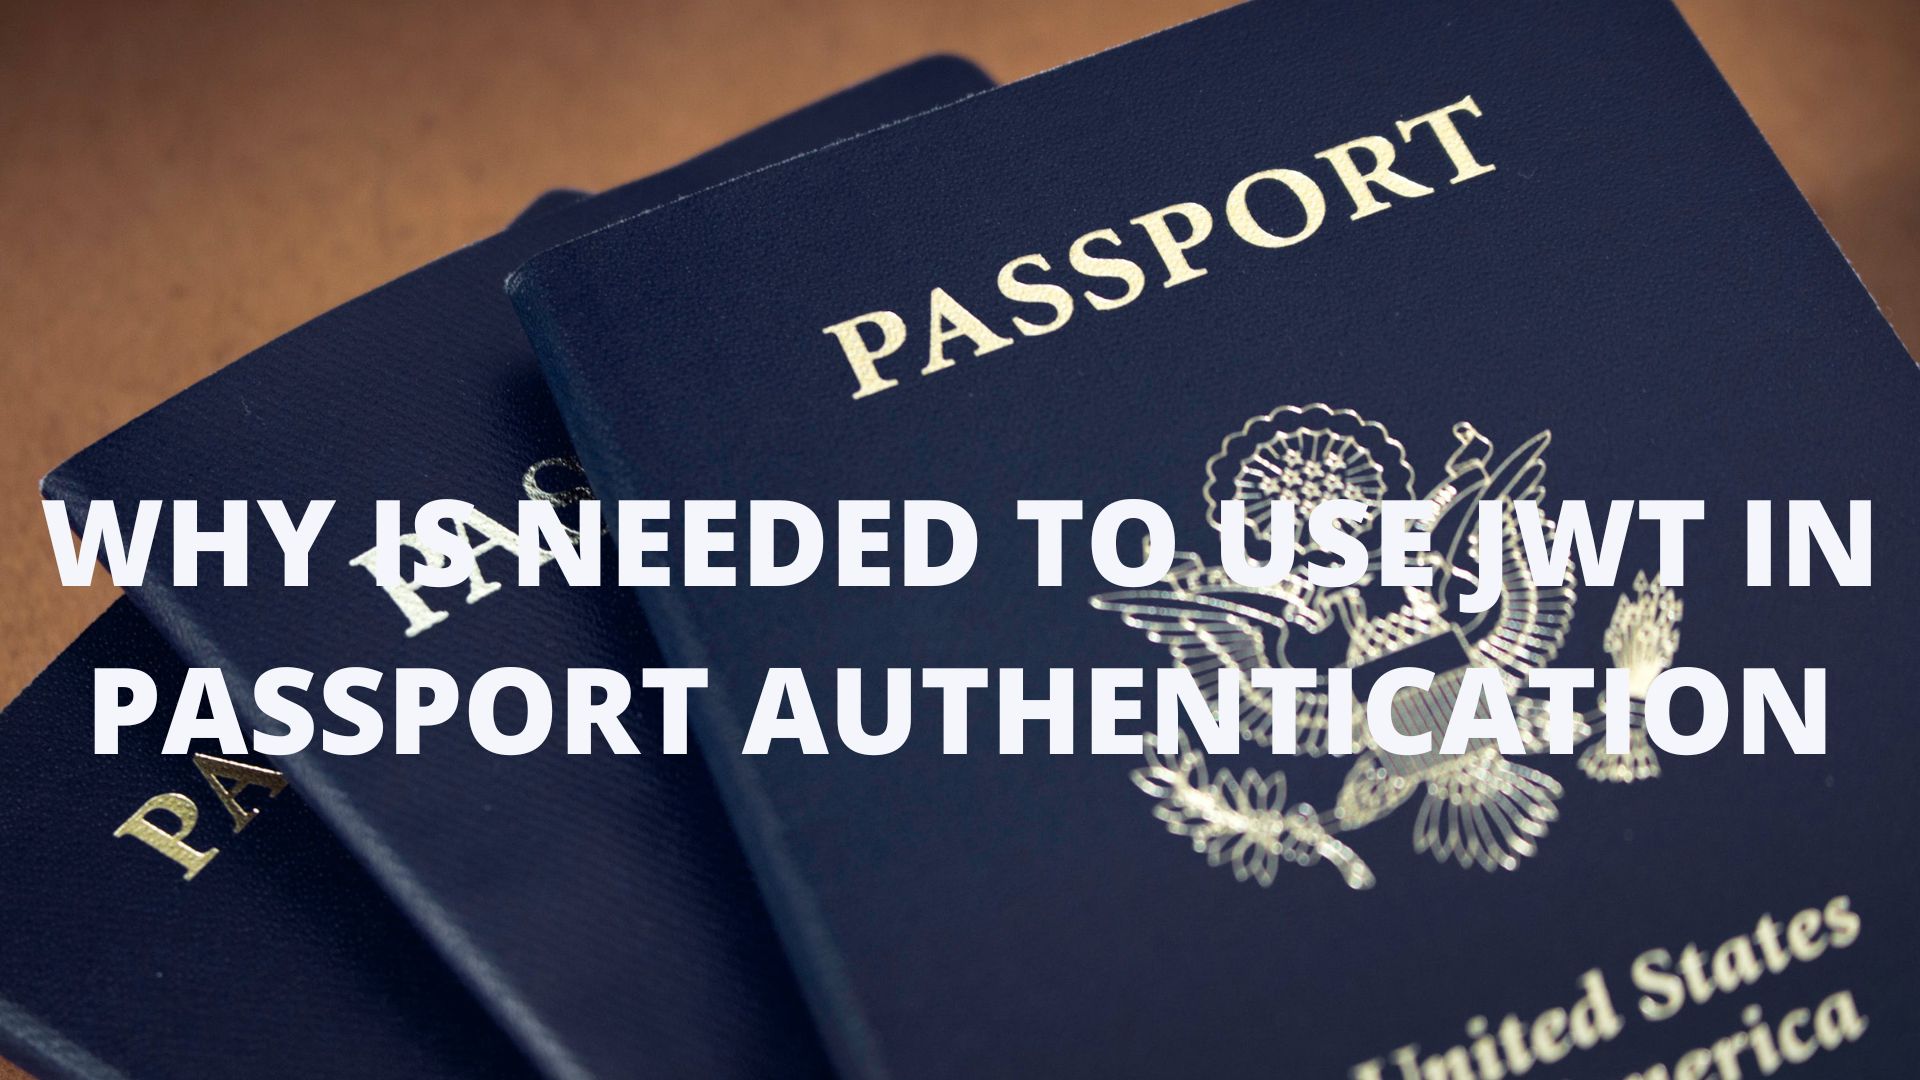 WHY IS NEEDED TO USE JWT IN PASSPORT AUTHENTICATION